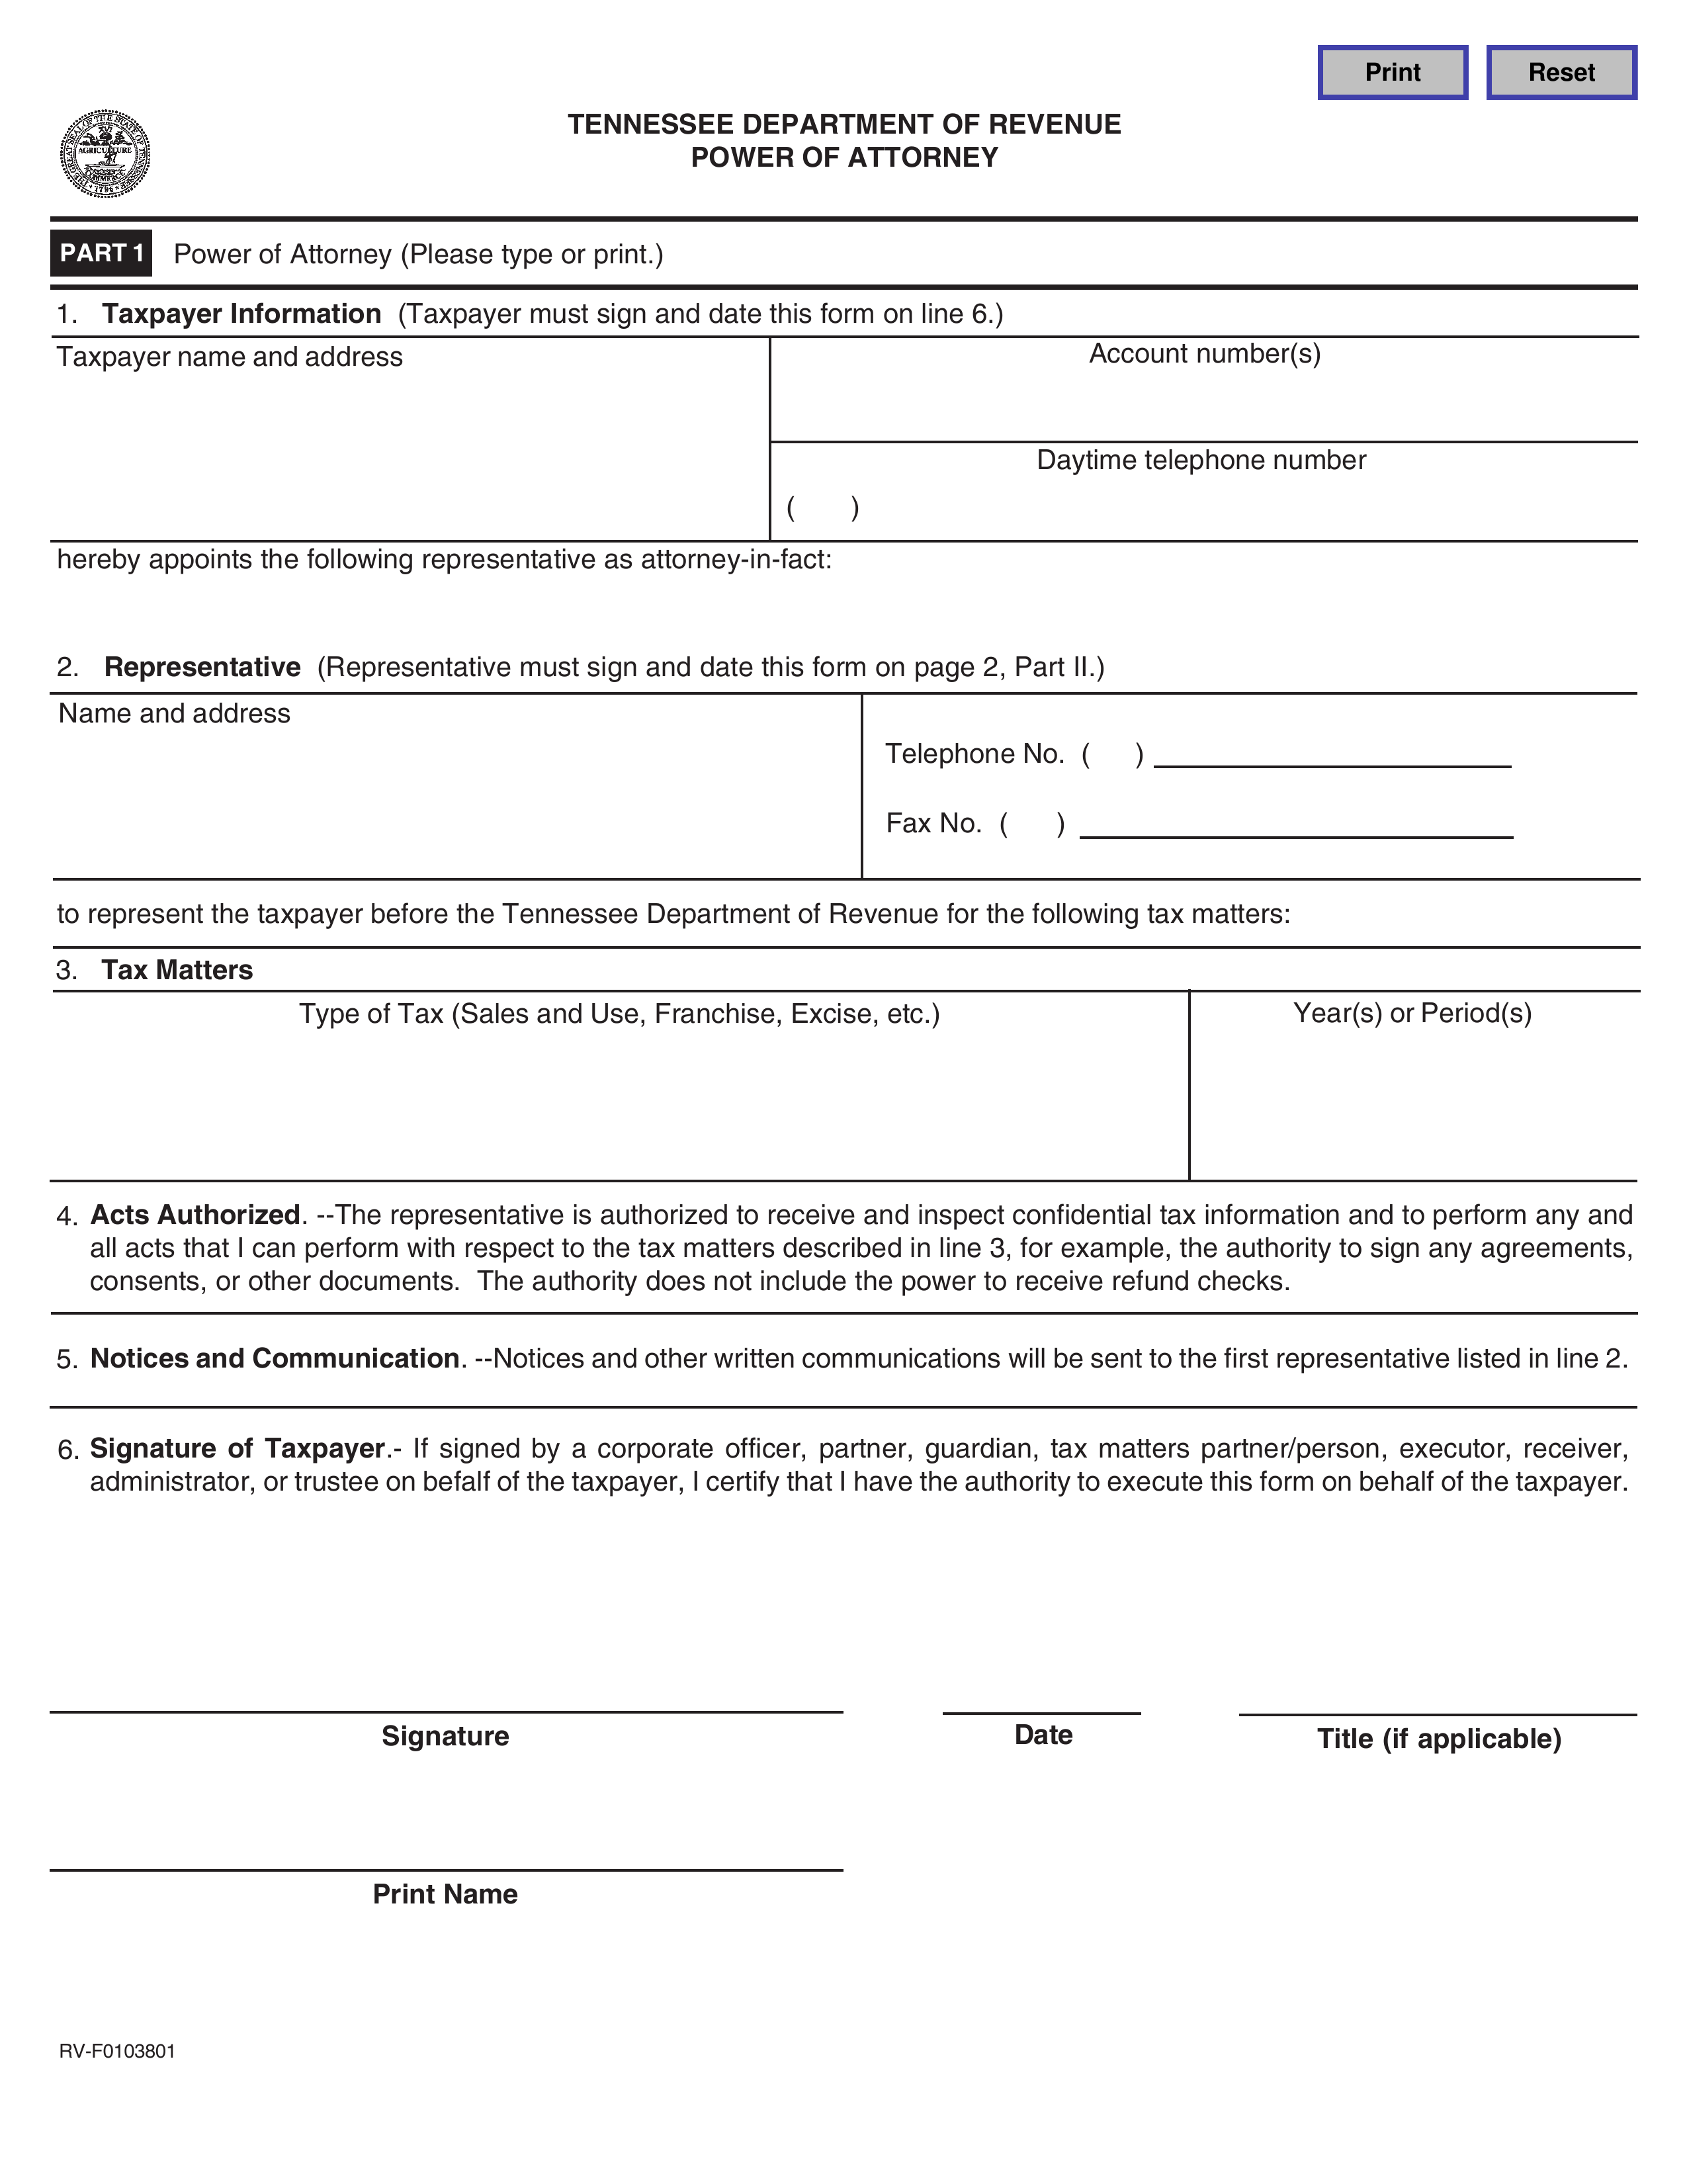 Tennessee Tax Power of Attorney (Form RV-F0103801)